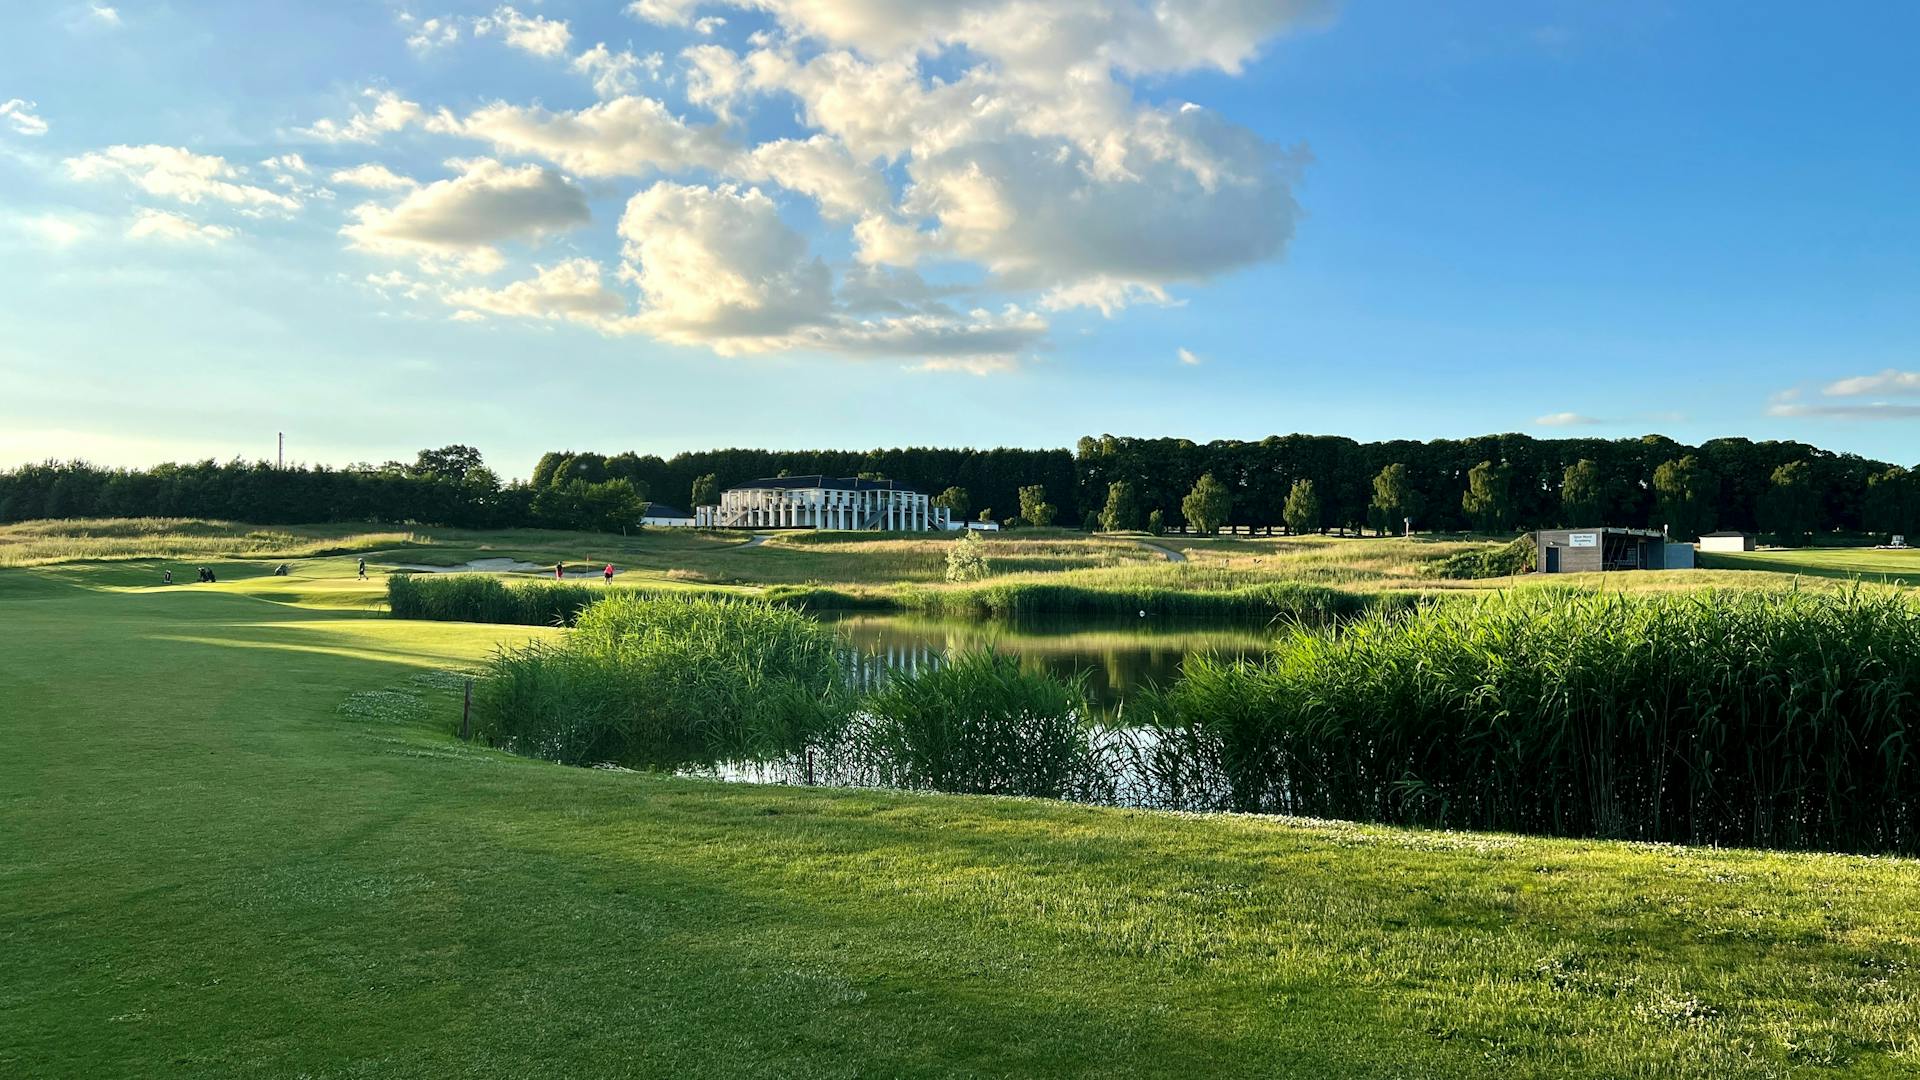 The course is drained using a catch basin, which collects rainwater in the surrounding three lakes, with the water then being reused to irrigate both the greens and tees. Source: Stensballegaard Golf Club